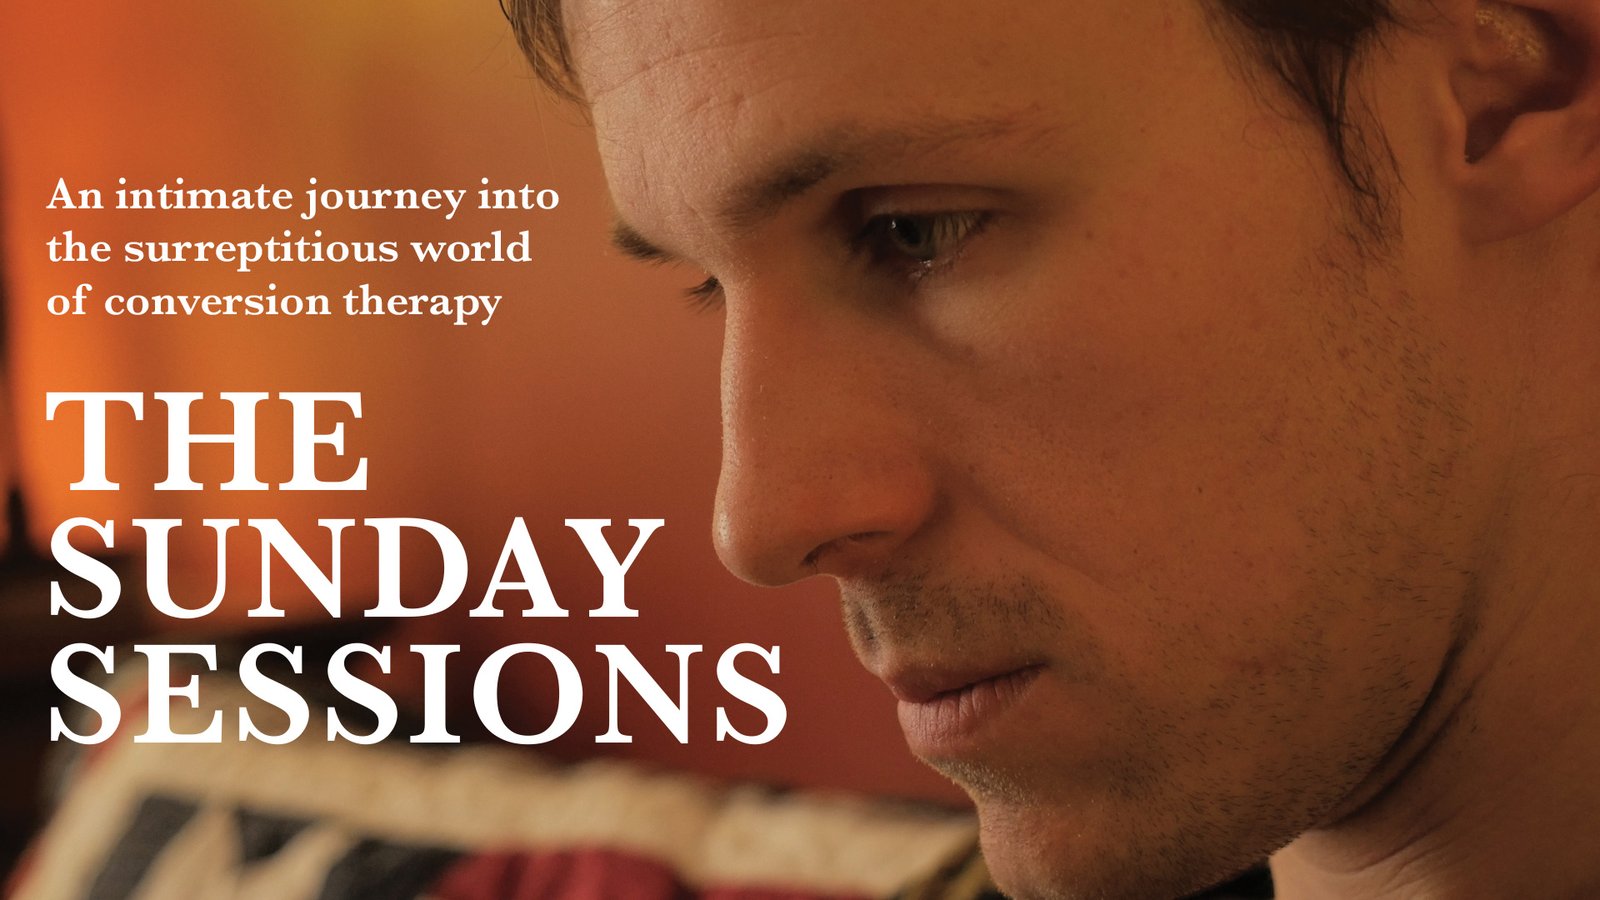 The Sunday Sessions - An Intimate Portrait of a Man Undergoing Conversion Therapy